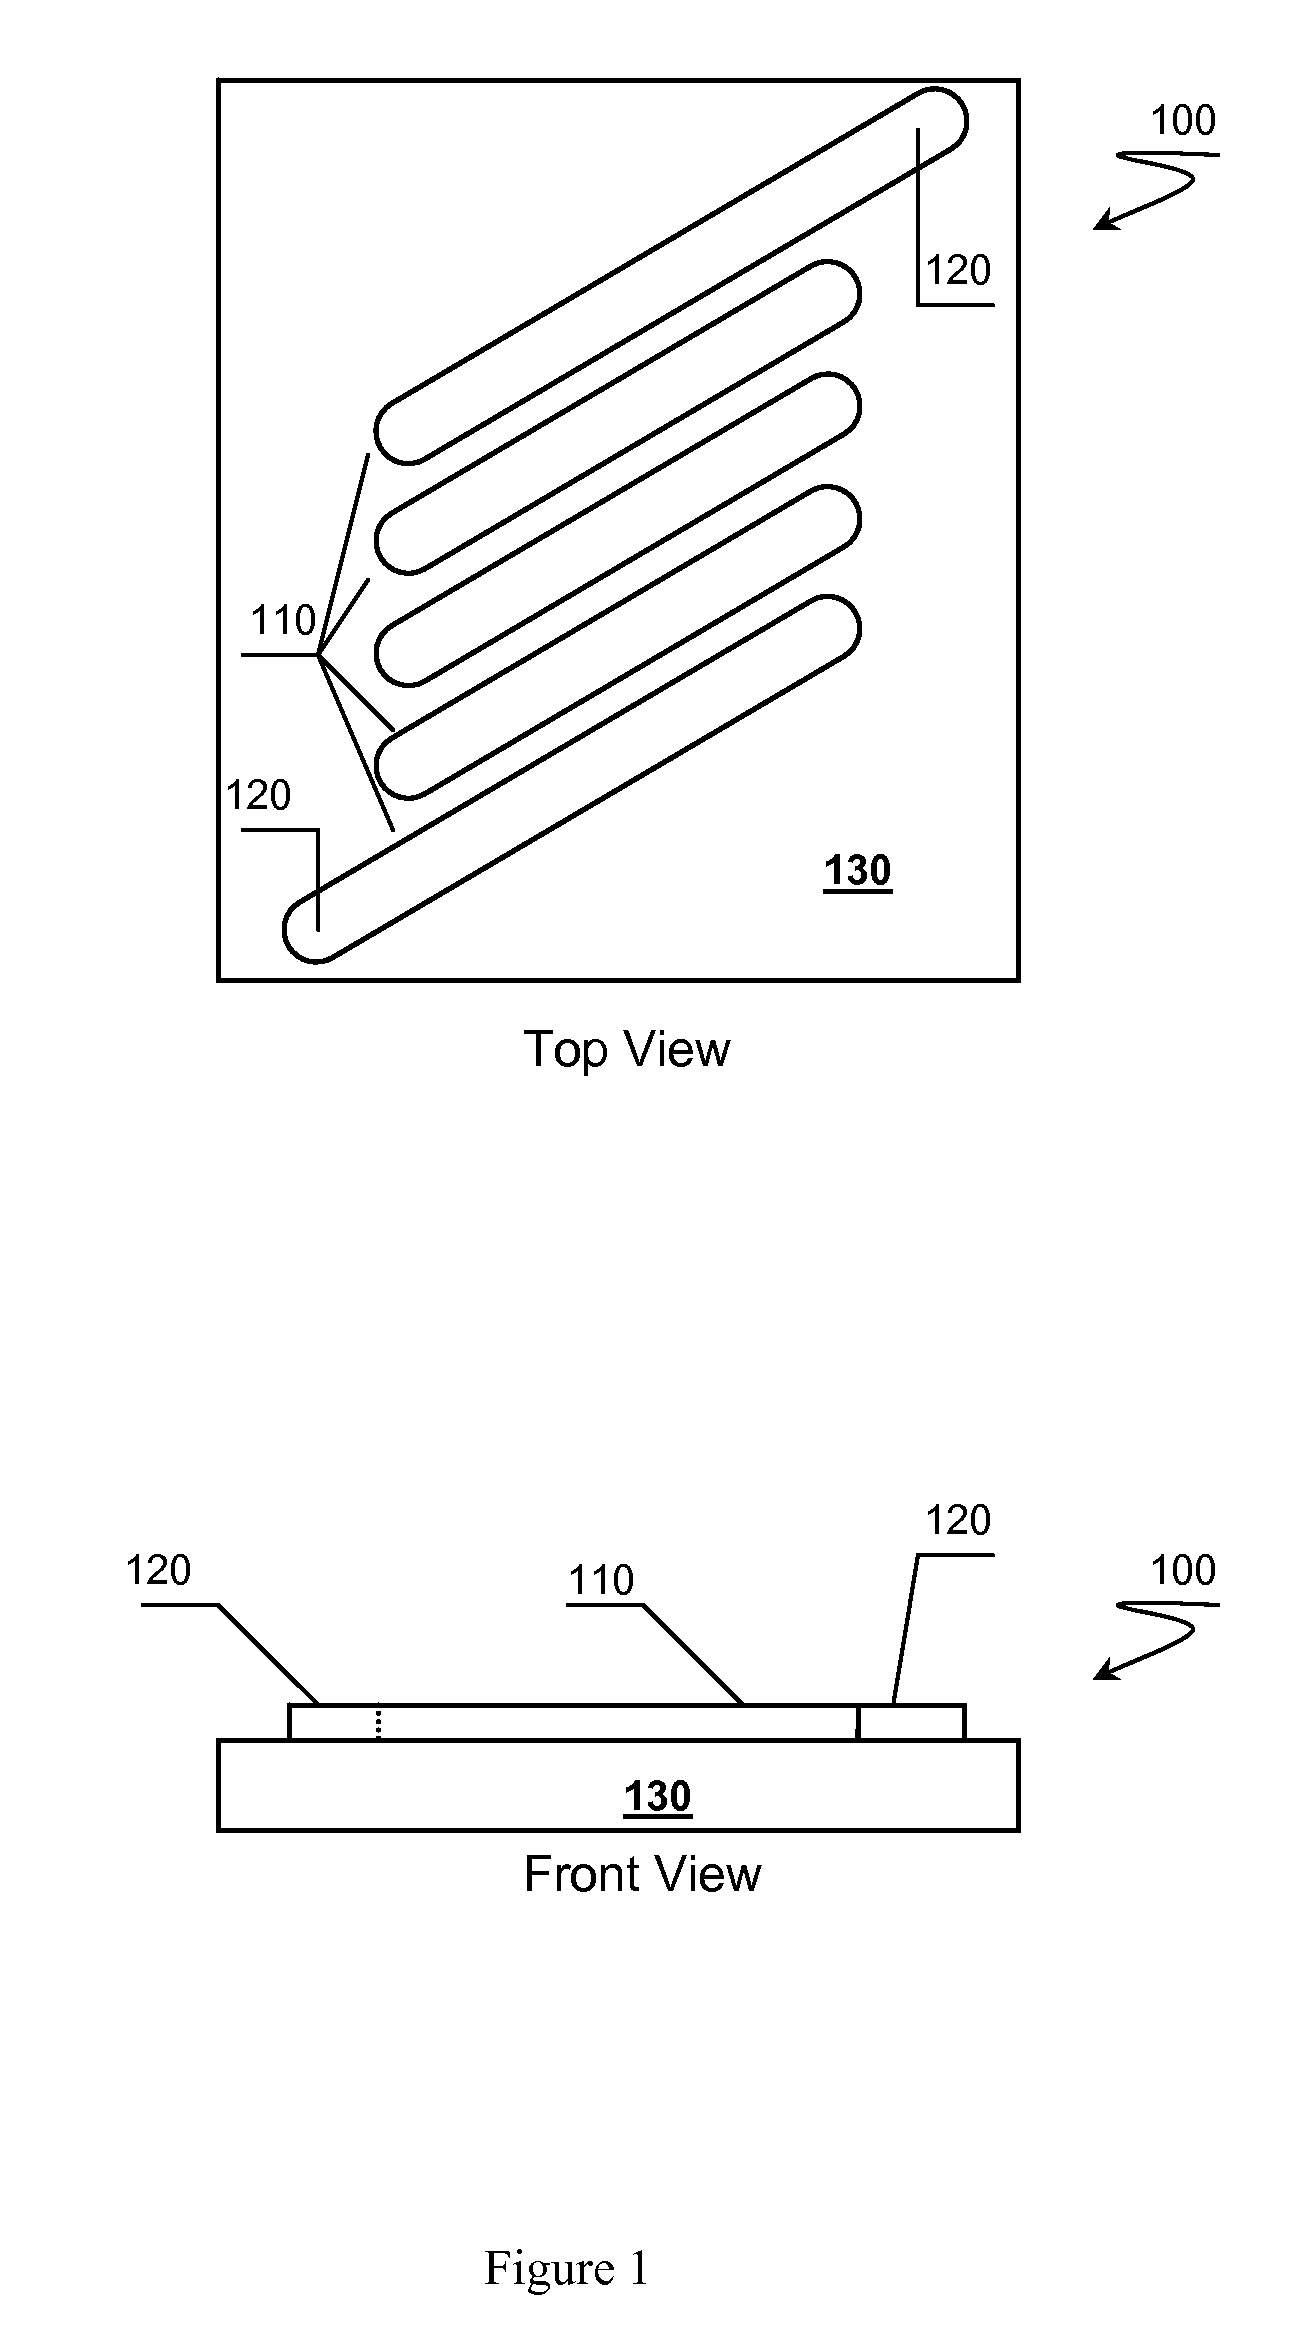 Solid State Components Having an Air Core